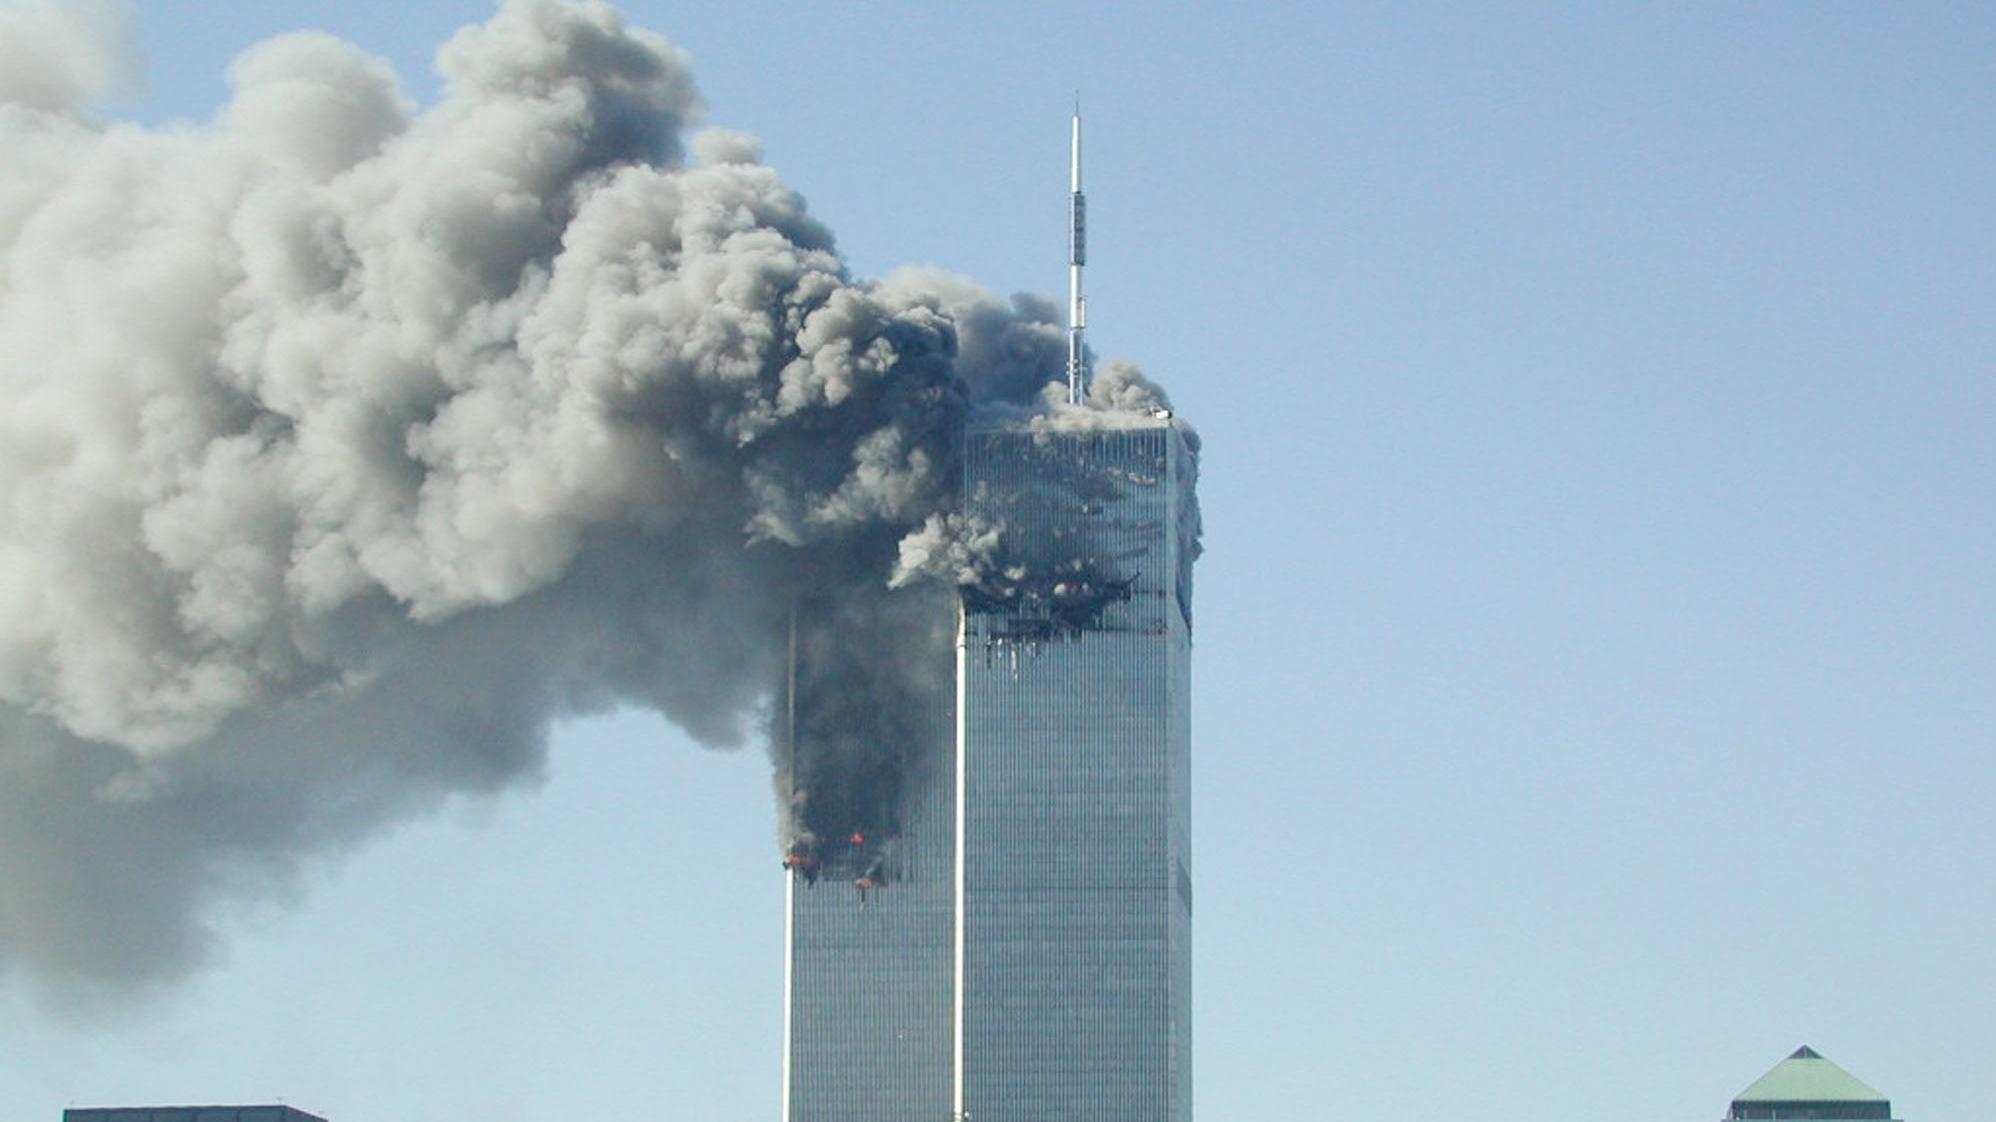 Judge issues ruling on films using copyrighted 9/11 footage